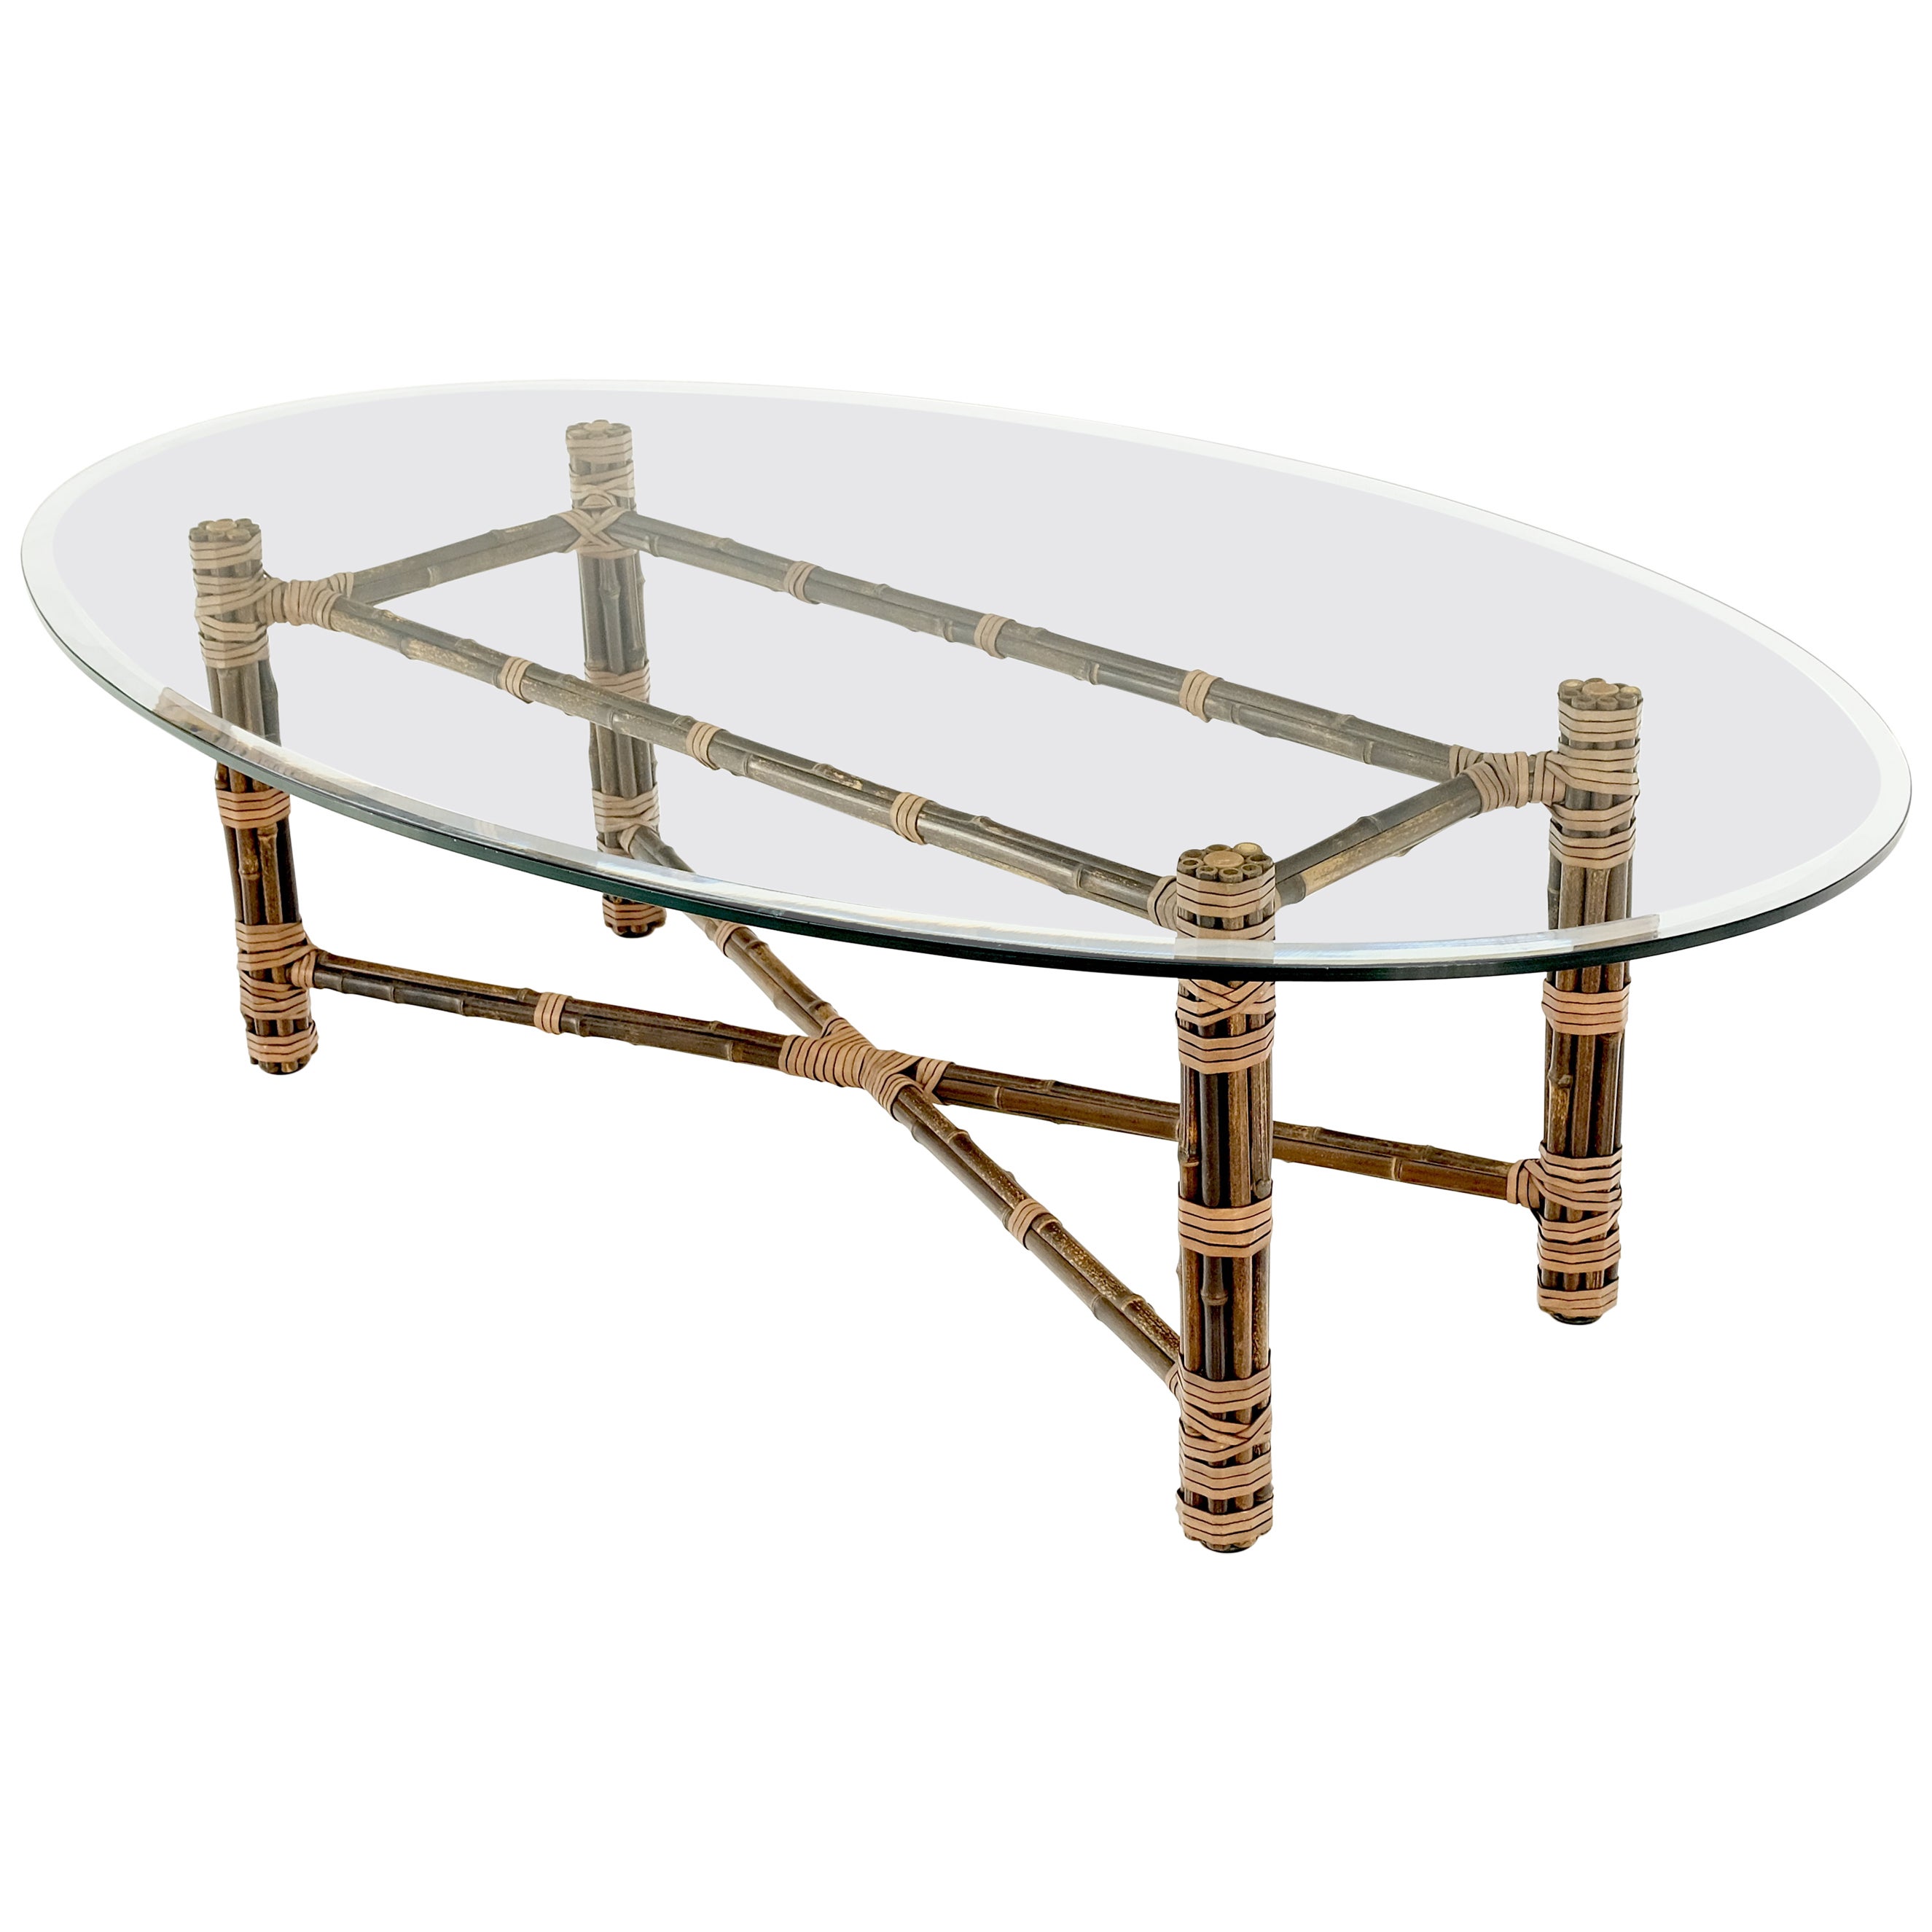 McGuire Oval Glass Top Bamboo & Leather Coffee Table MINT! For Sale